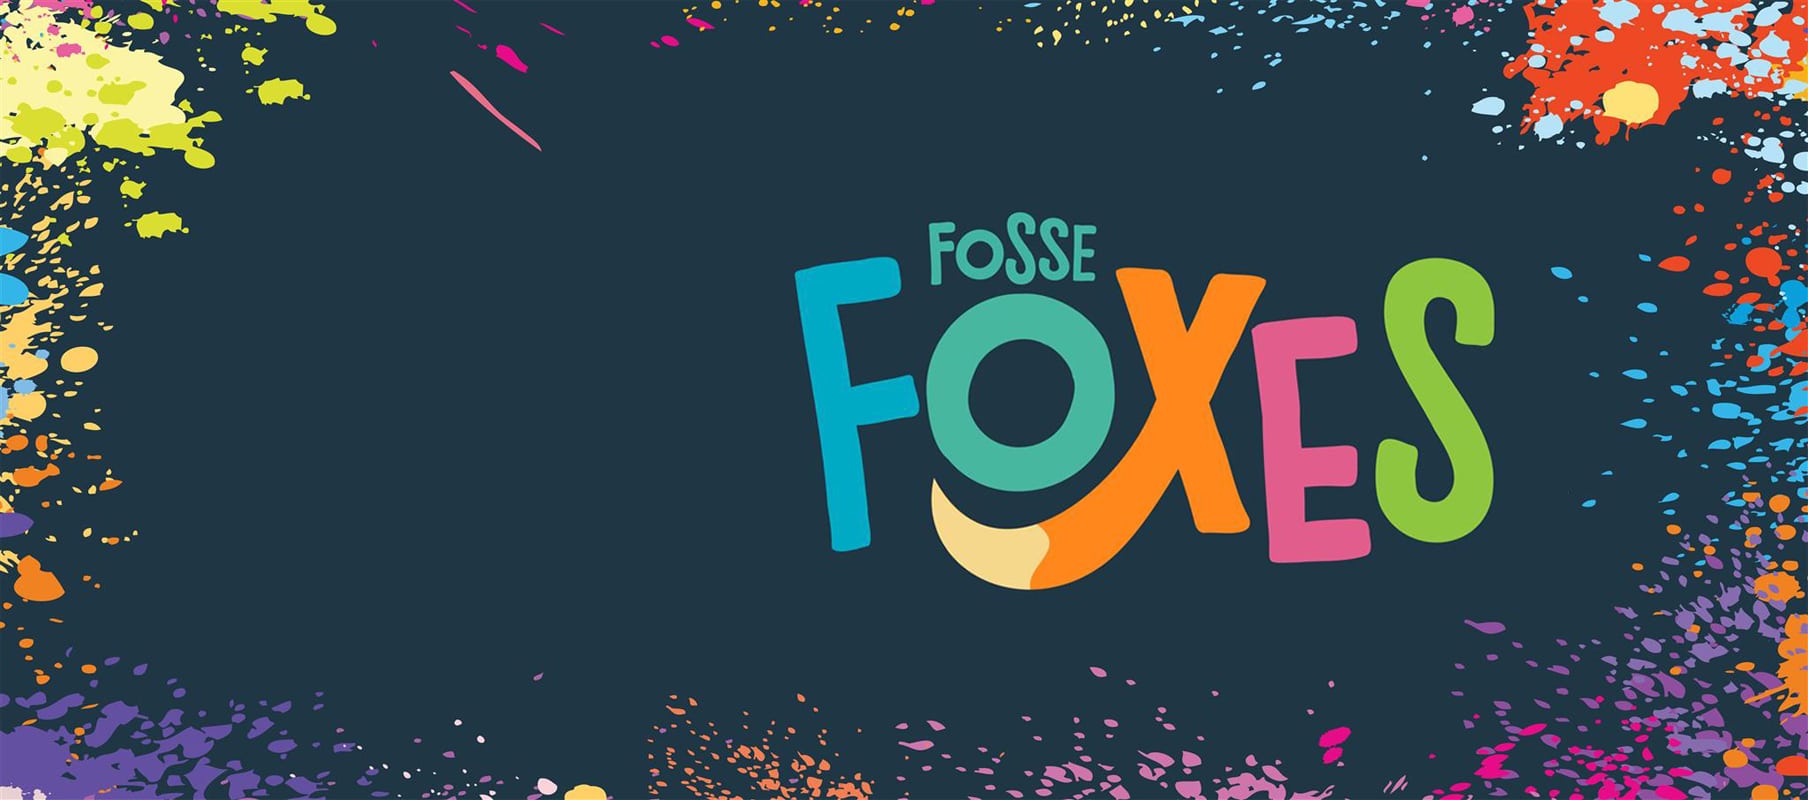 Discover our Fosse Foxes trail